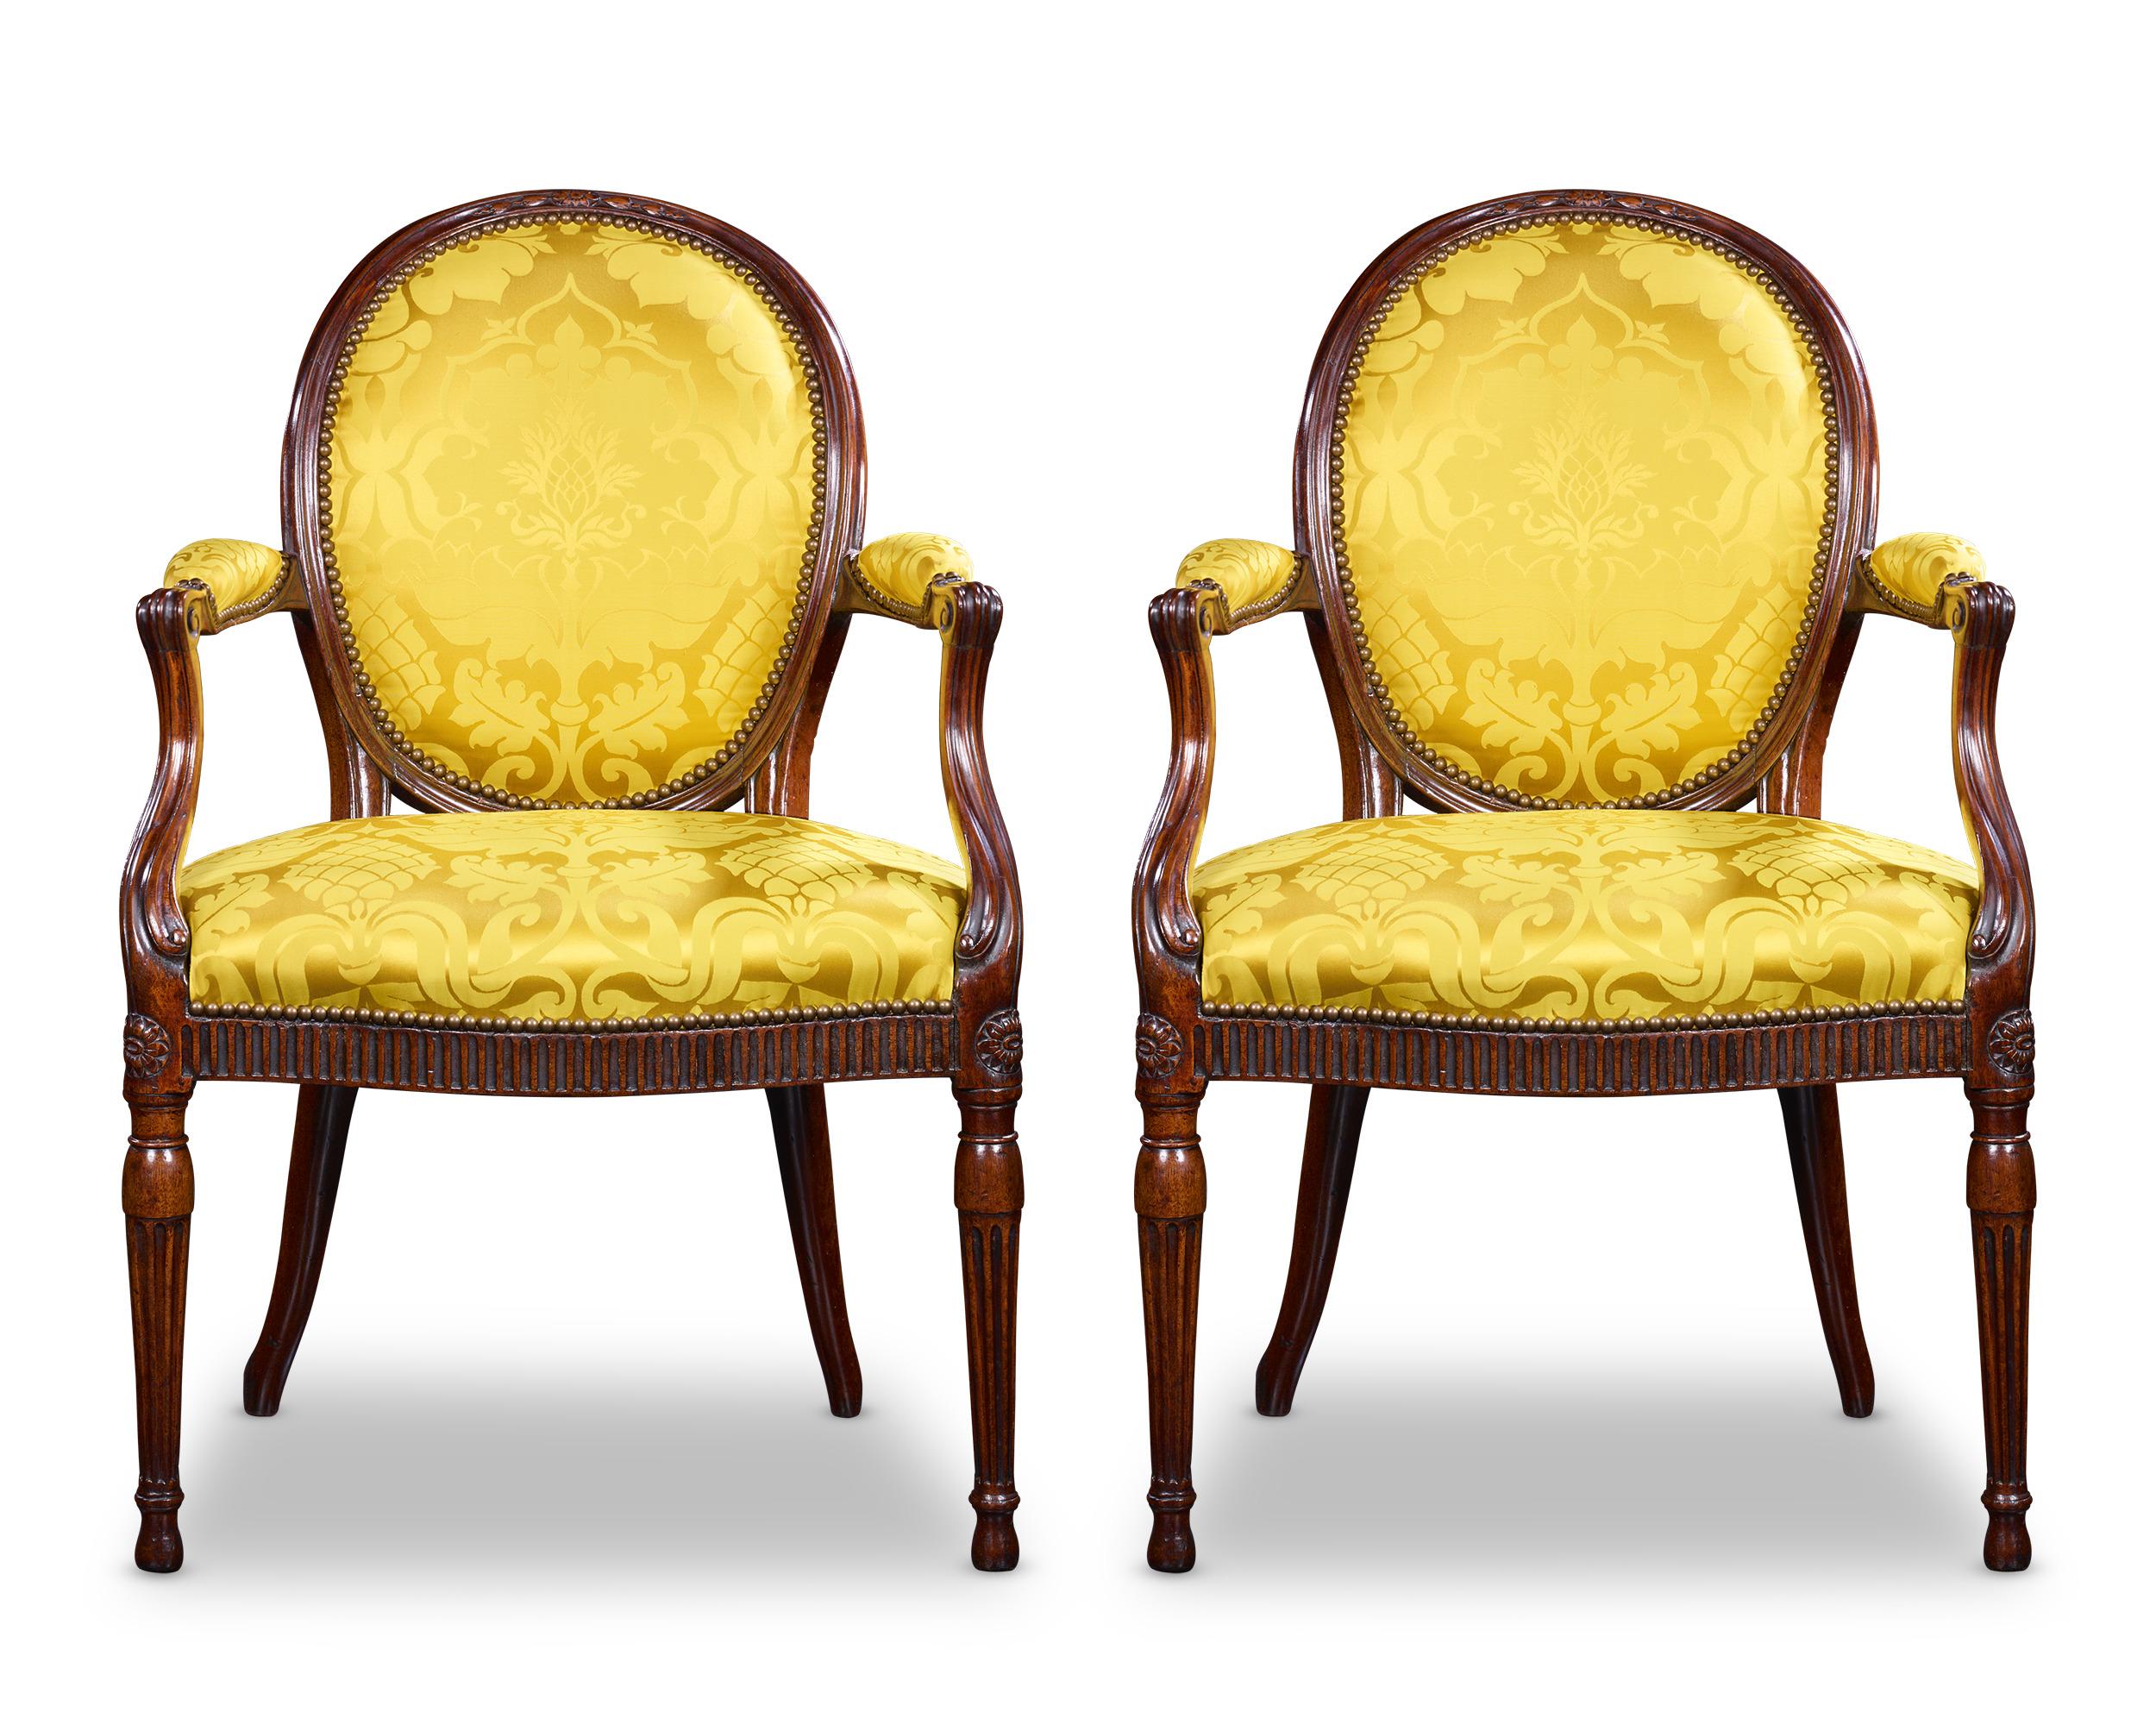 Pair Of Mahogany Armchairs By Thomas Chippendale In Excellent Condition For Sale In New Orleans, LA